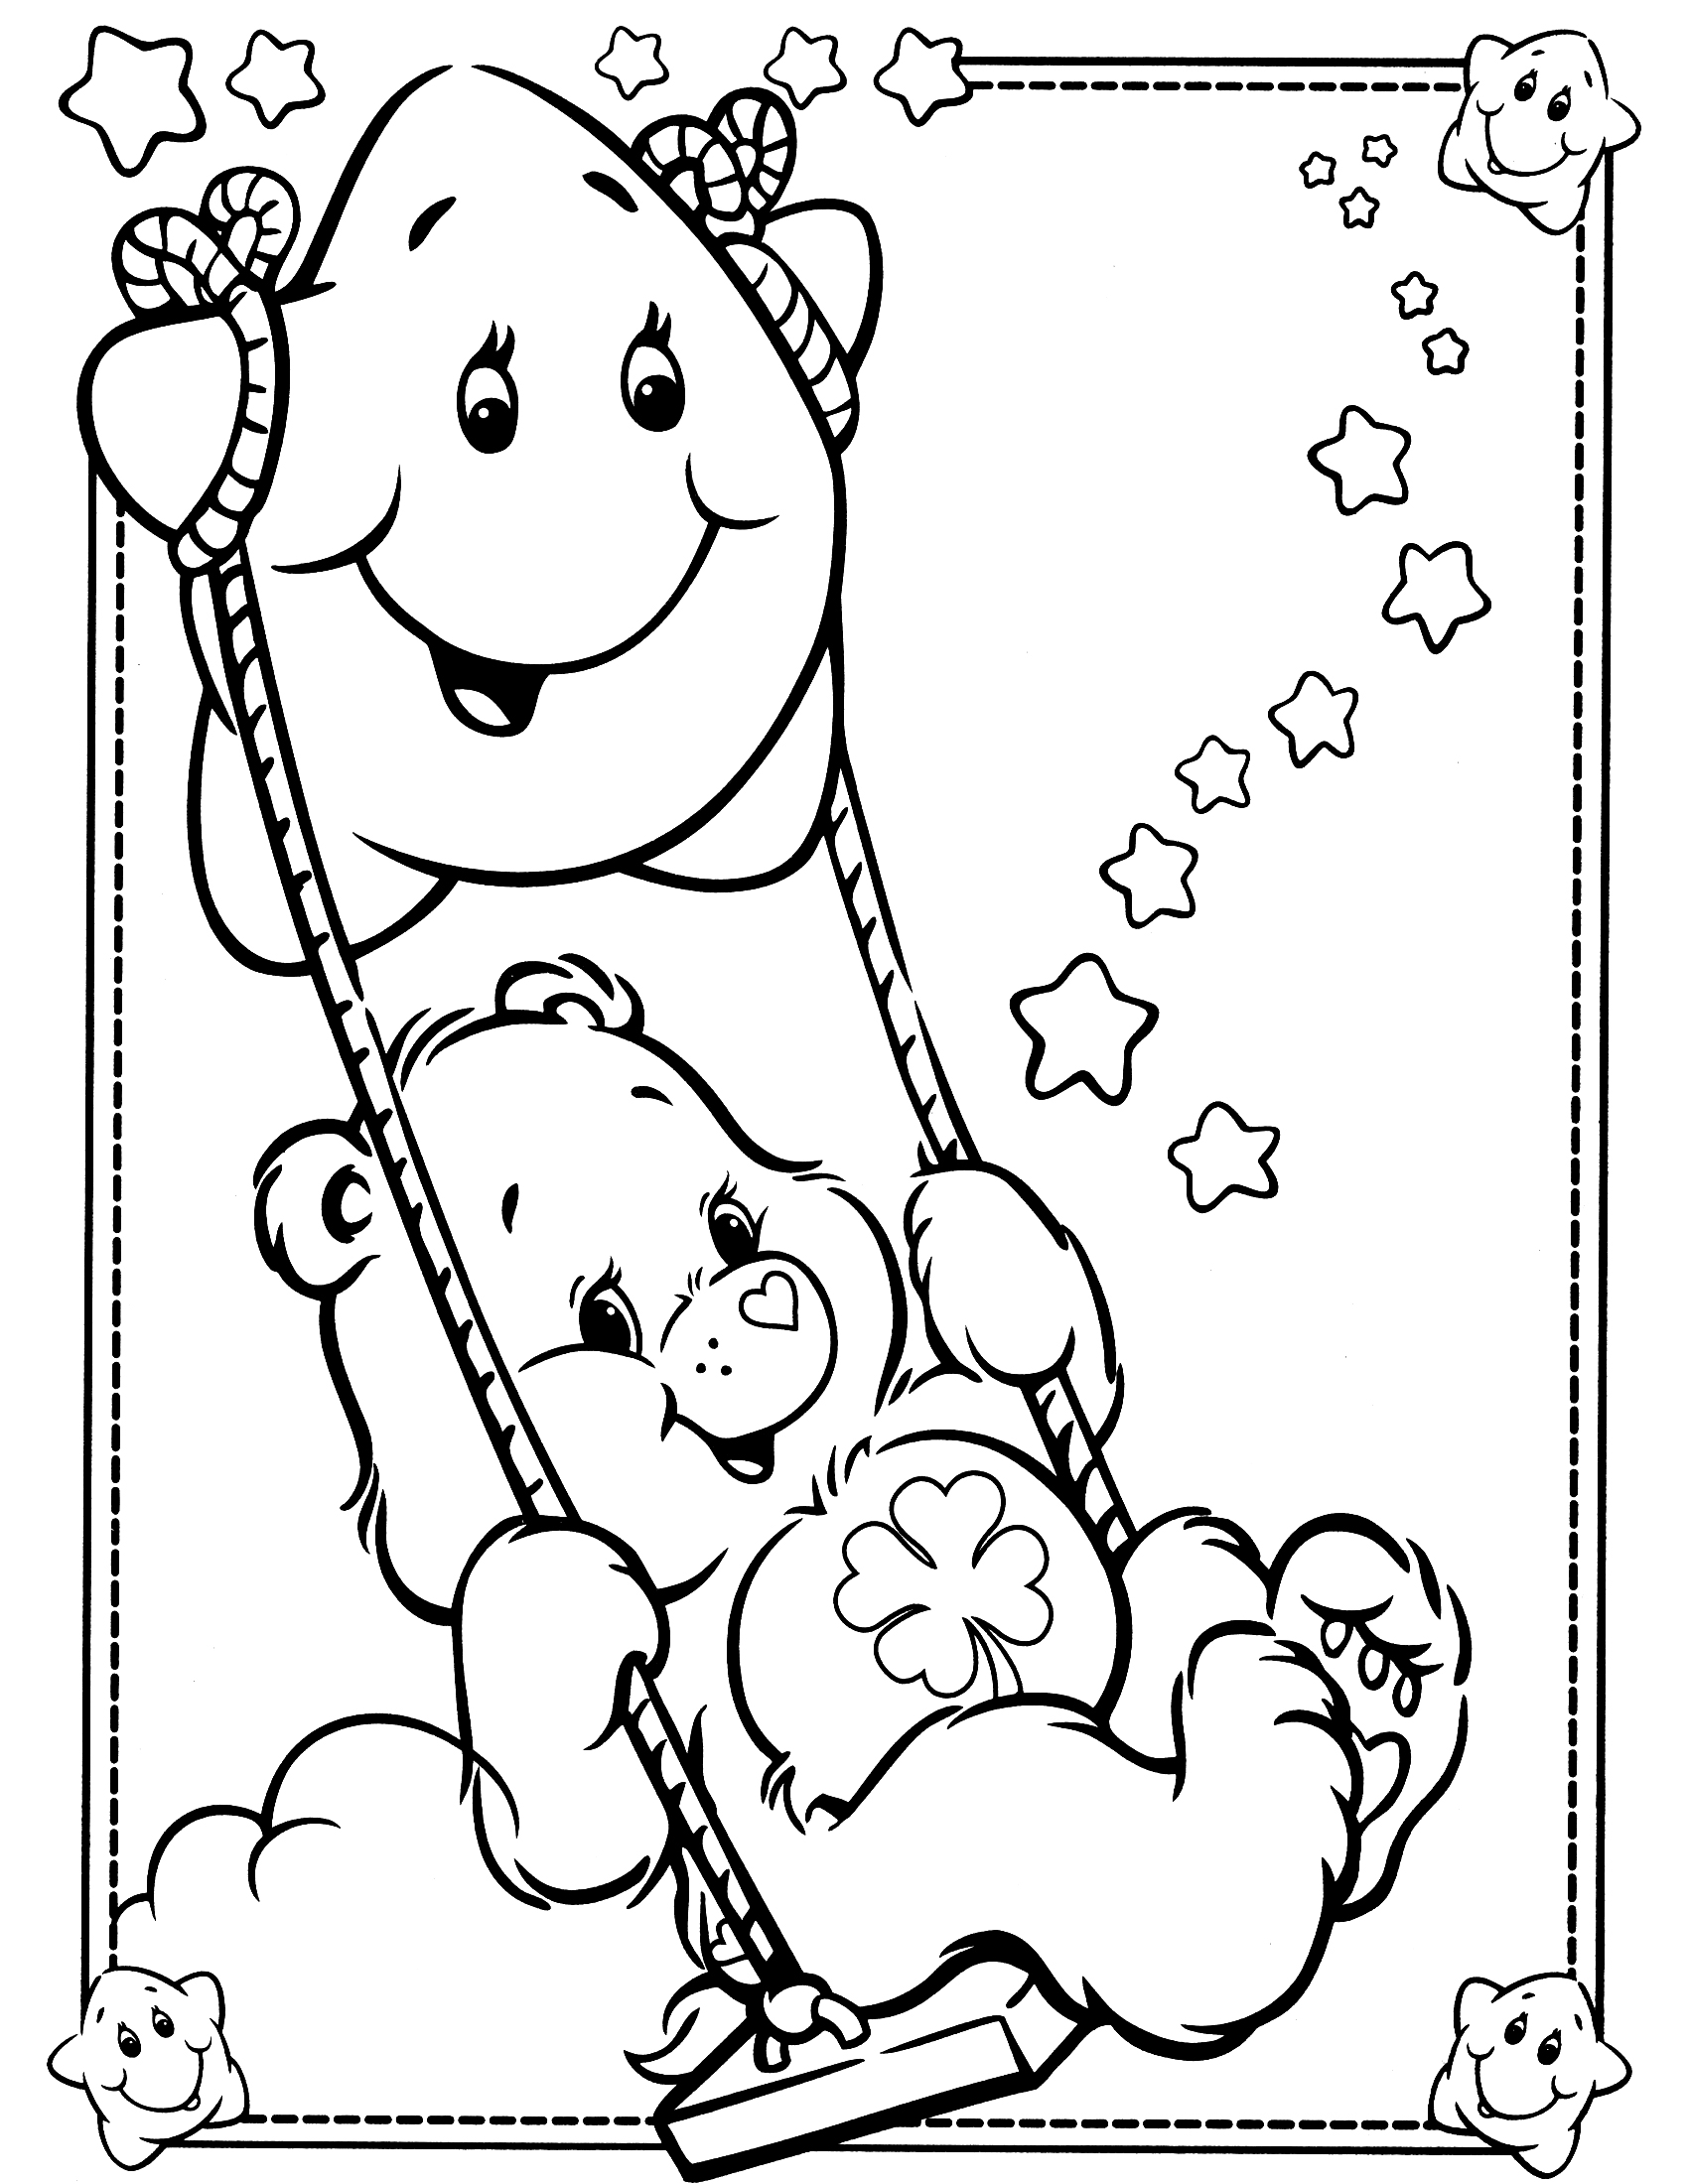 Drawings Care Bears (Cartoons) Page 2 Printable coloring pages